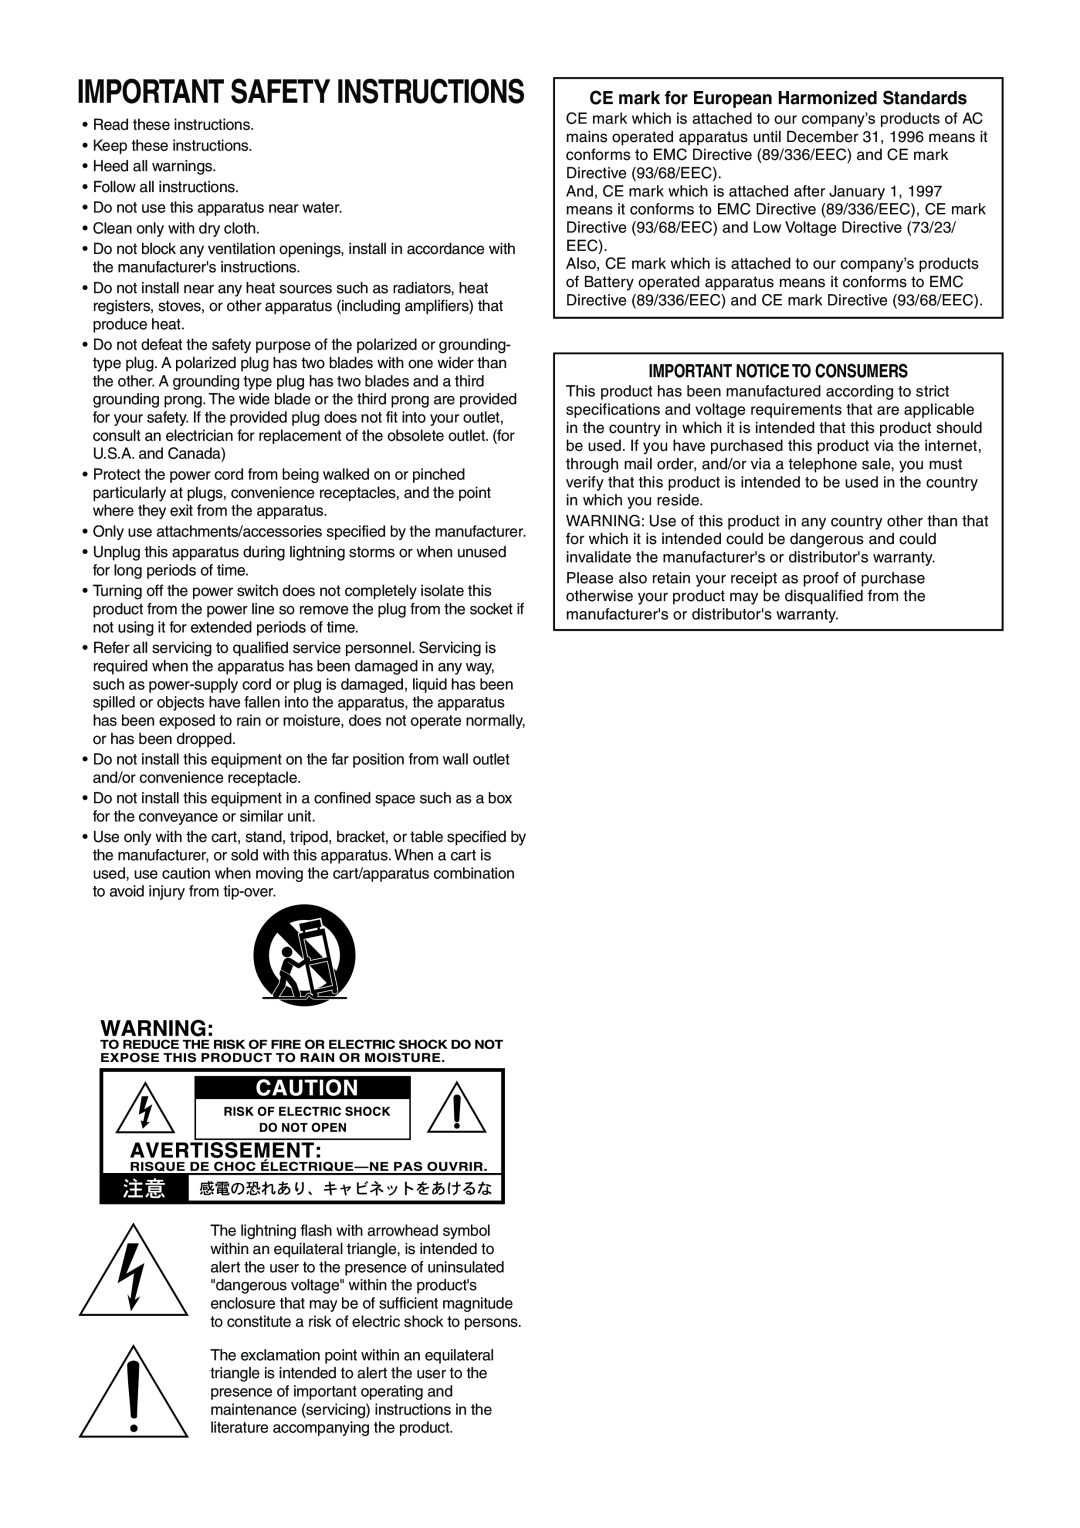 Vox 10 manual Important Safety Instructions, CE mark for European Harmonized Standards, Important Notice To Consumers 